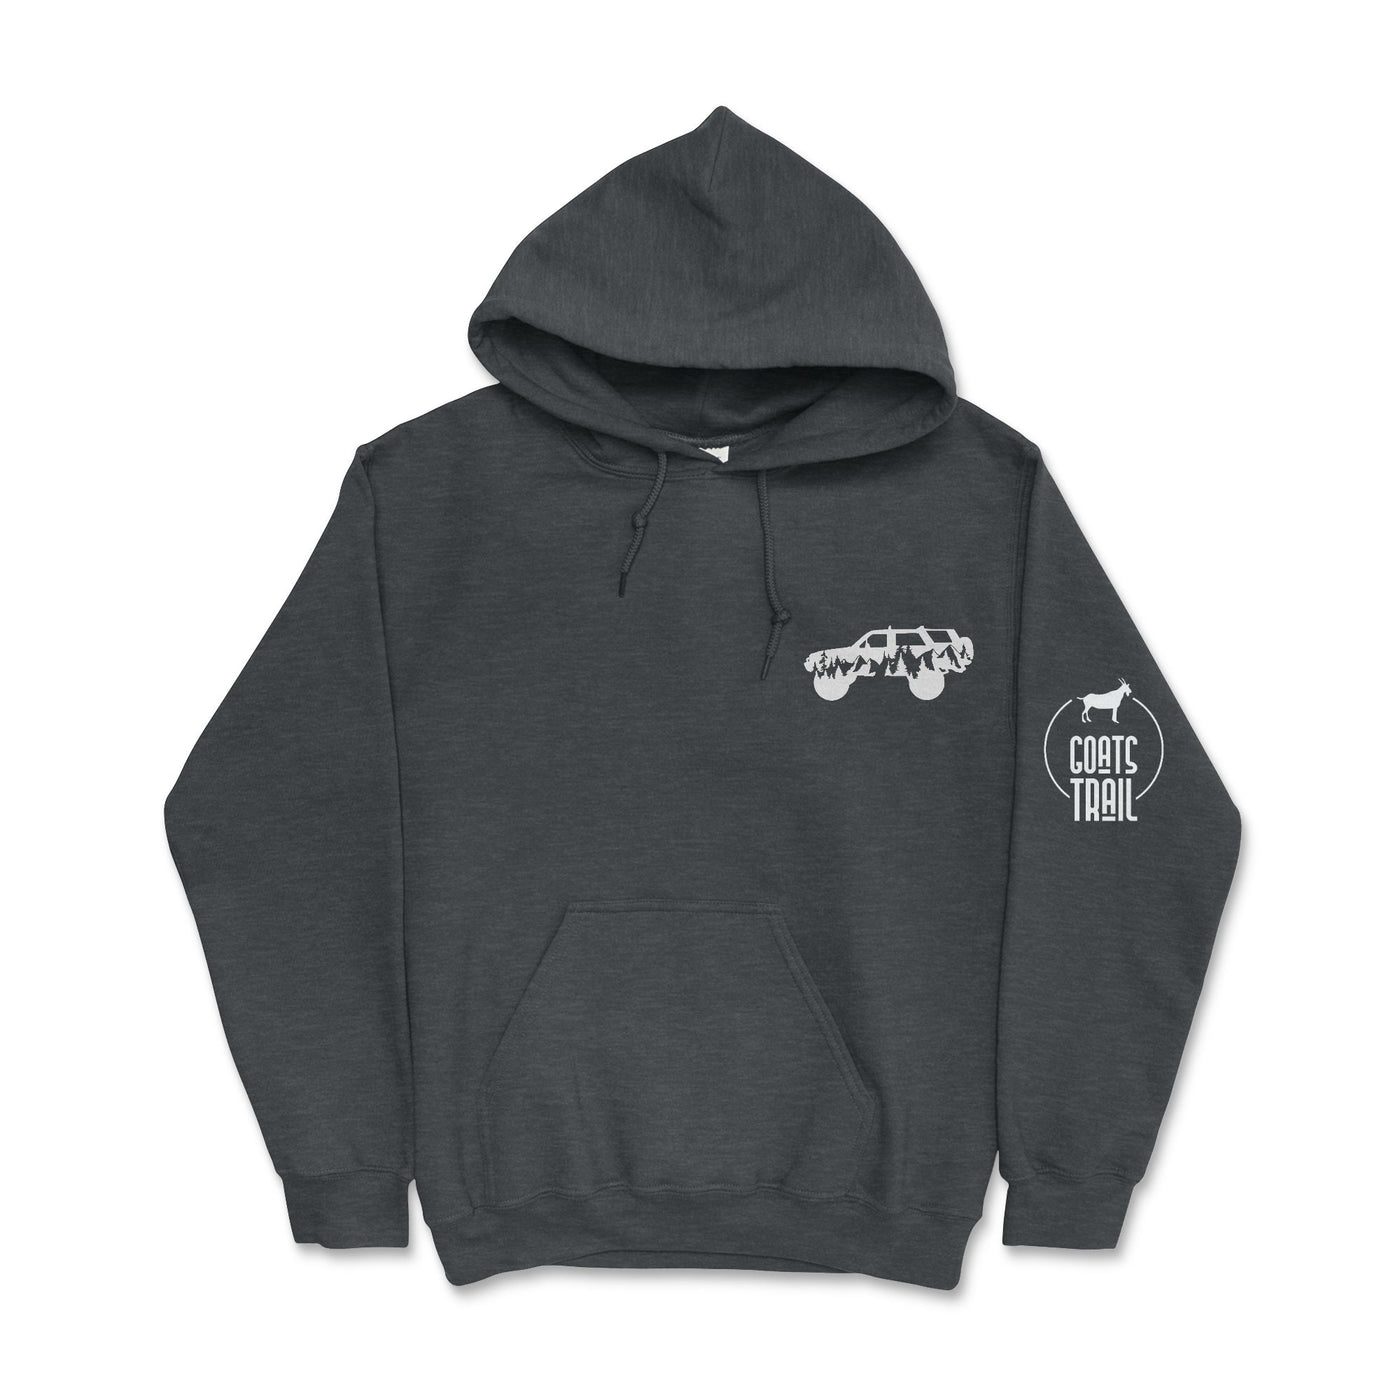 White 4Runner Hooded Sweatshirt - Goats Trail Off-Road Apparel Company